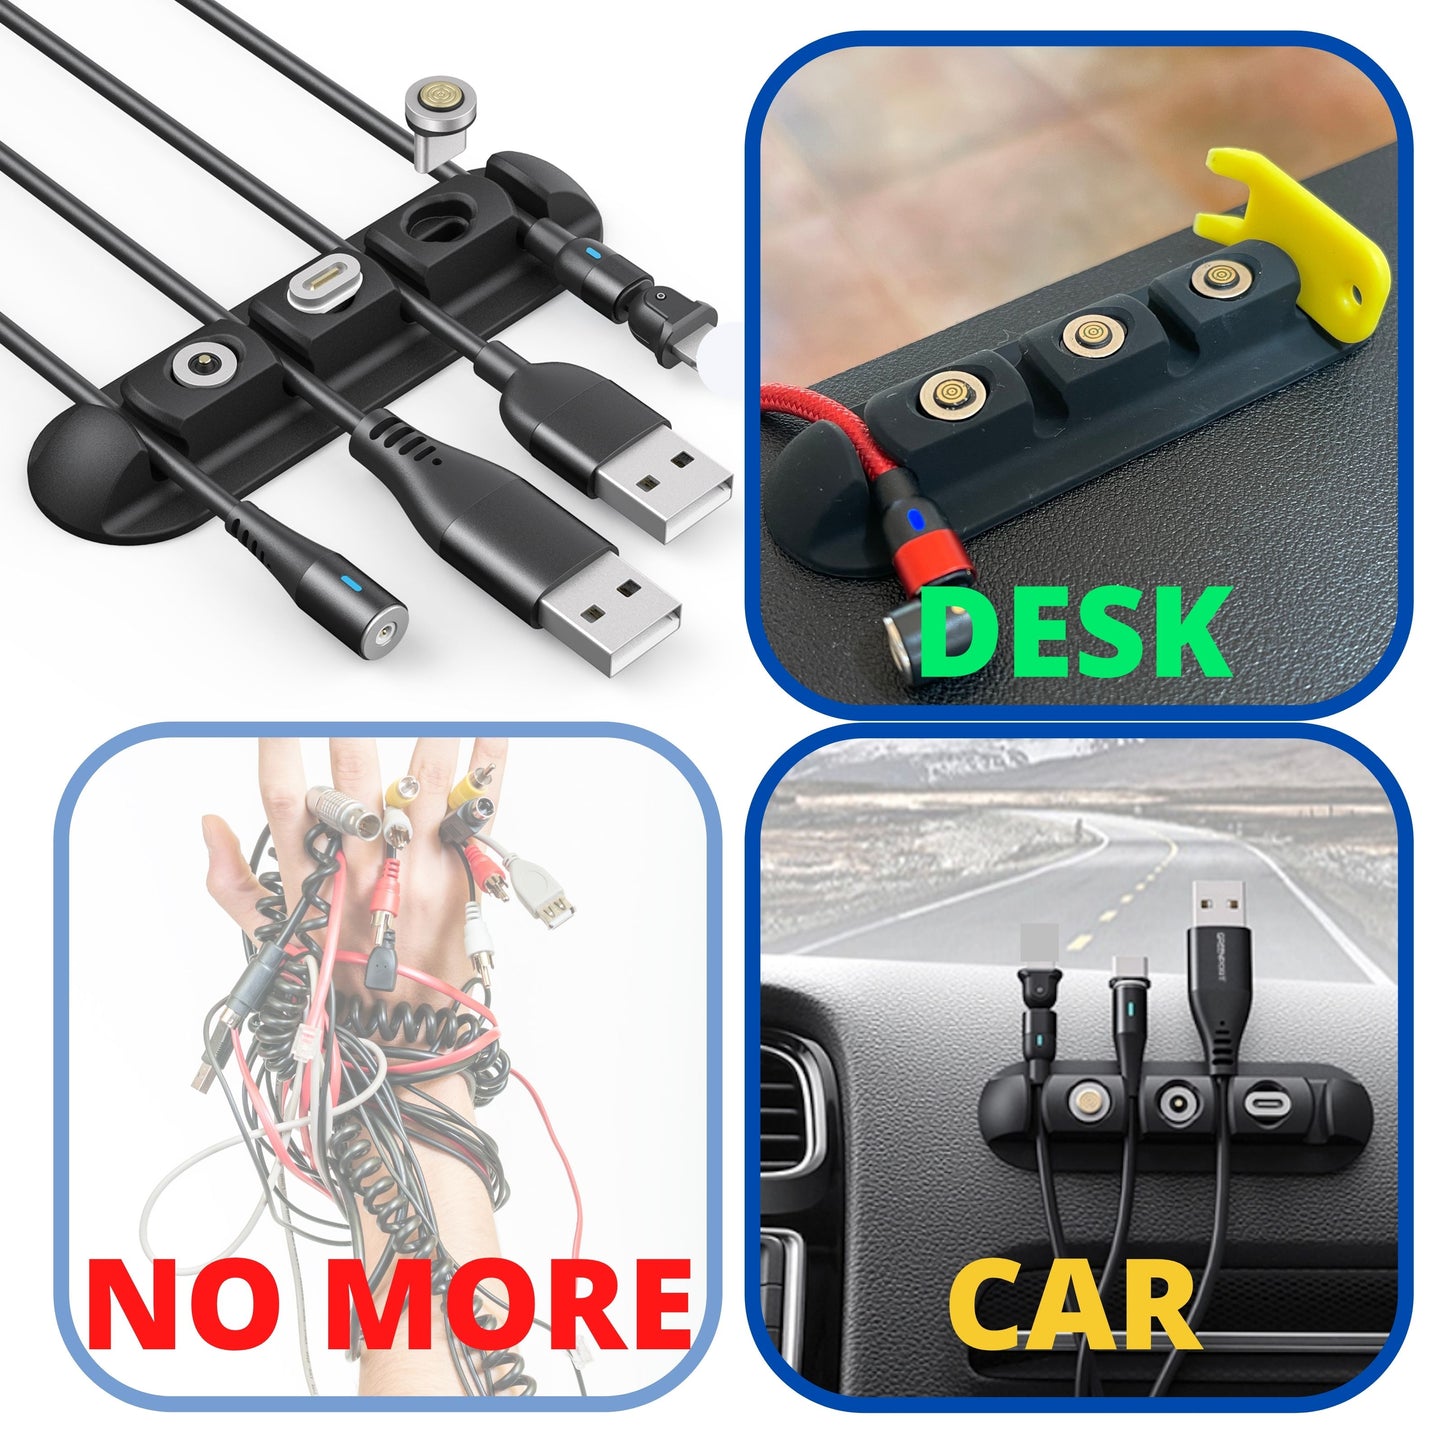 Magnetic Charging Tips Storage Desk Stick [5-Pack] with 4 Cord Organizer 3 Holes